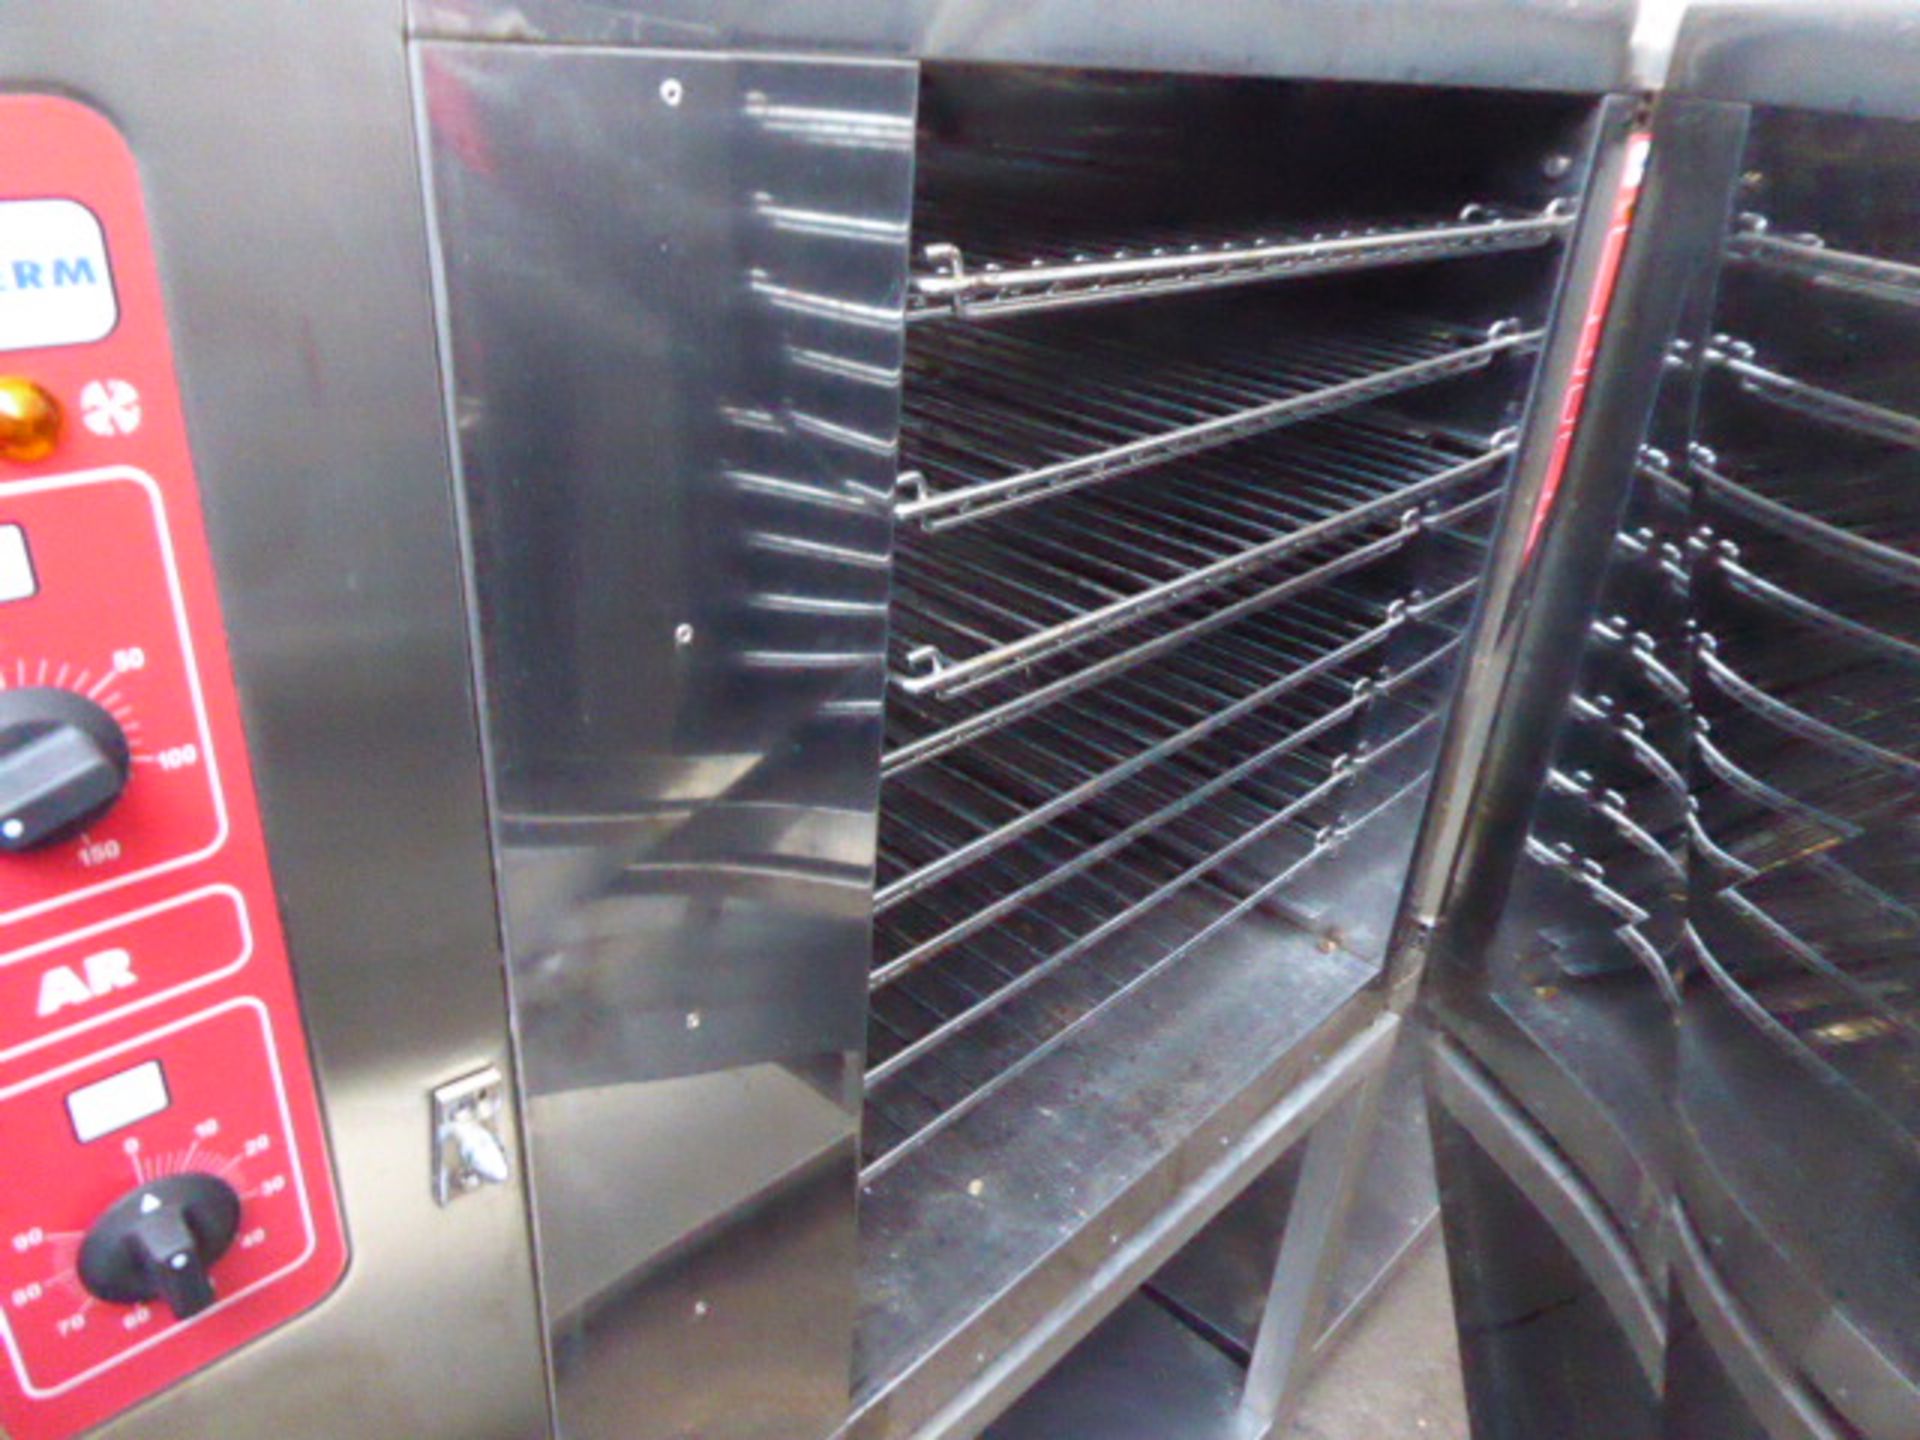 102cm Convotherm regeneration oven with 9 trays 3 phase - Image 2 of 2